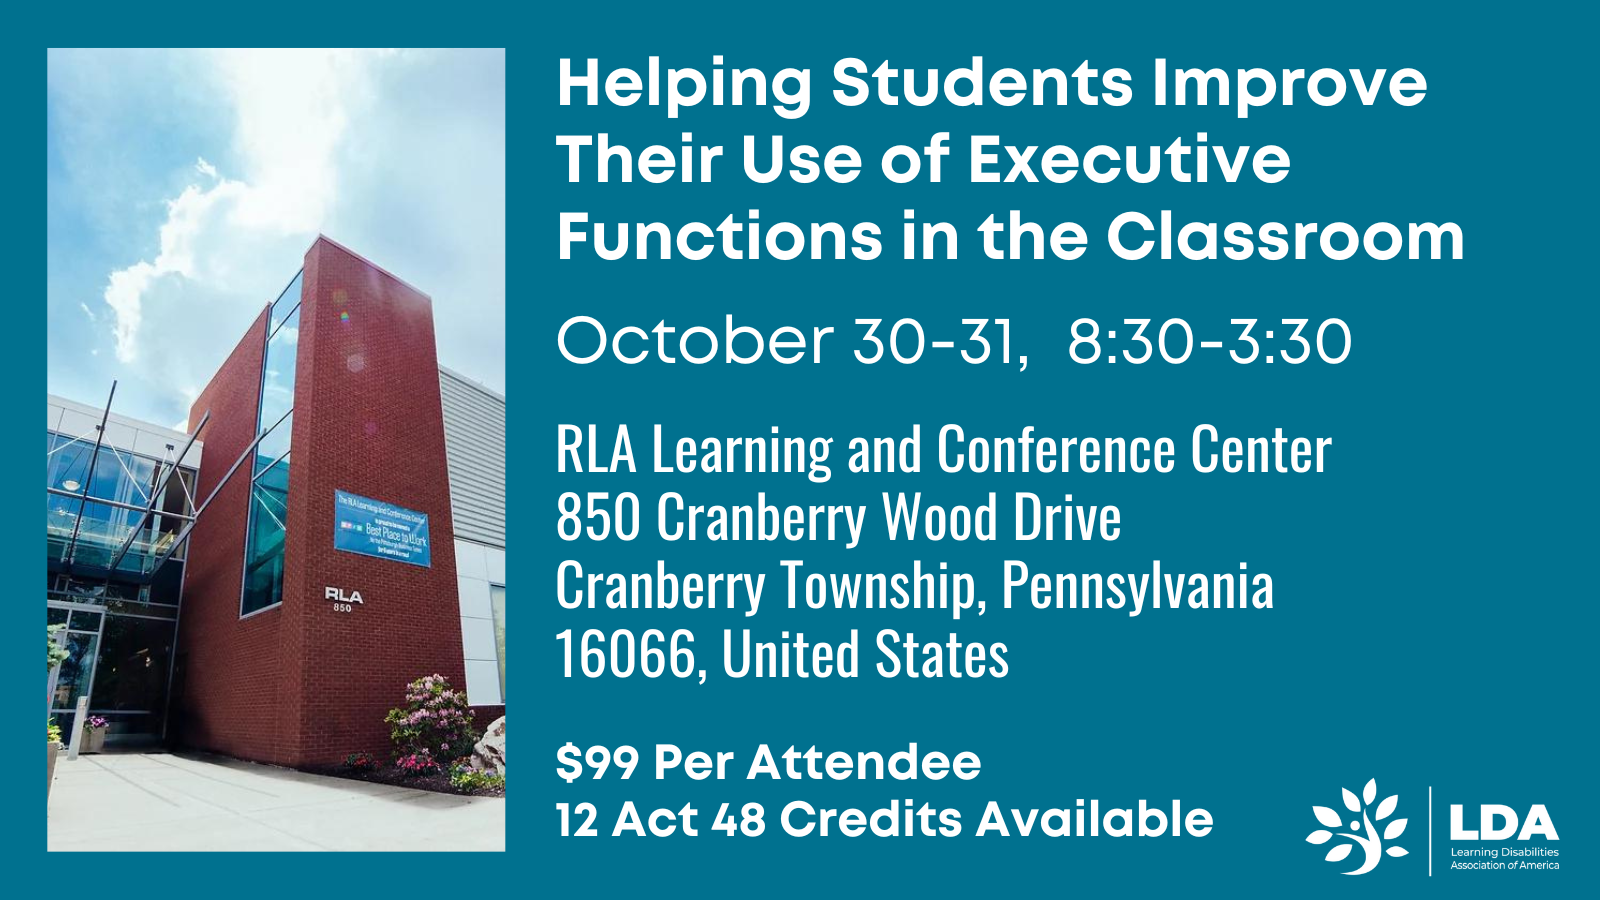 Helping Students Improve Their Use of Executive Functions in the Classroom. October 30th-31st, 8:30-3:30, RLA Learning and Conference Center, 850 Cranberry Woods Drive, Cranberry Township, PA, 16066, United States. $99 per attendee. 12 Act 48 Credits Available.